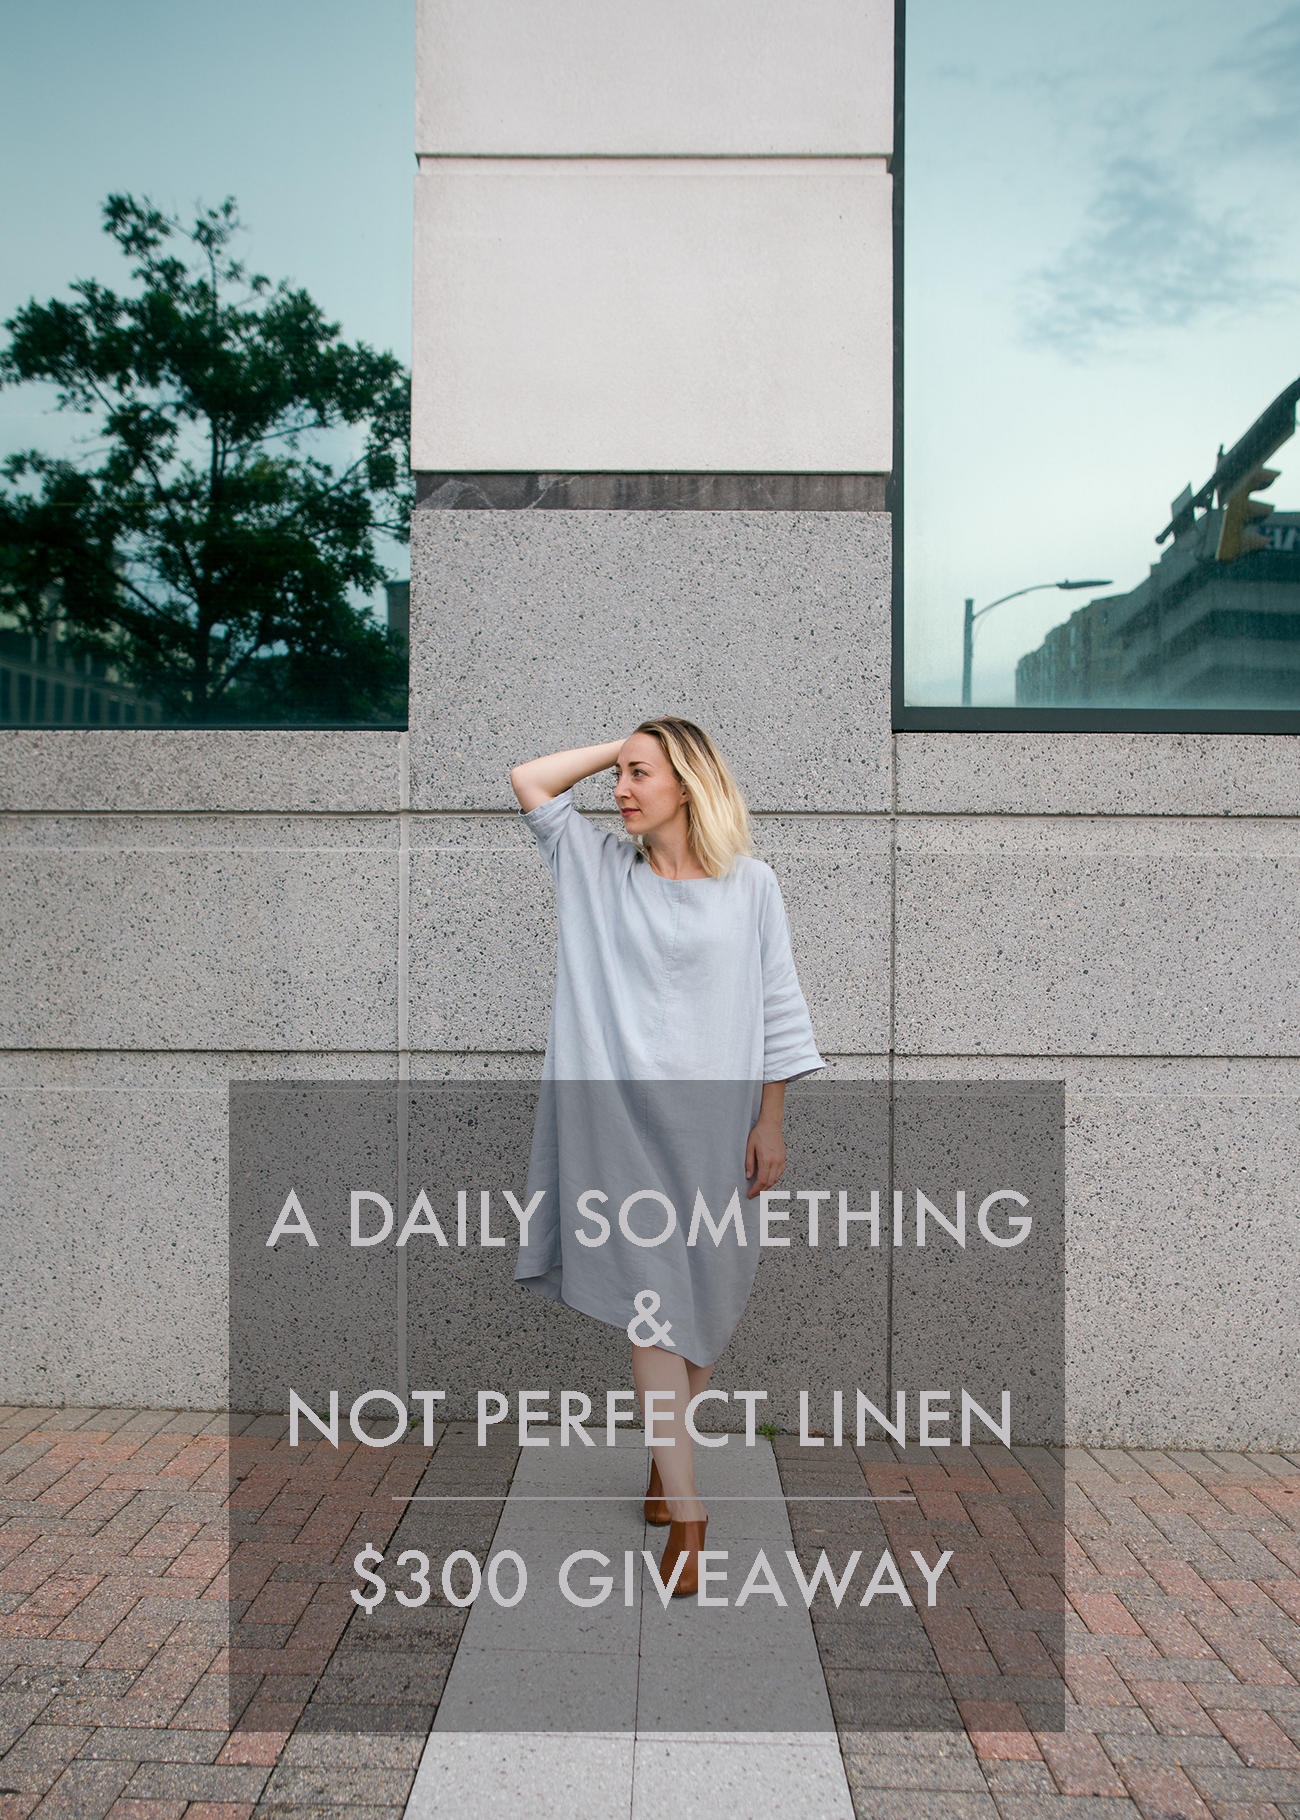 notPERFECTLINEN - the beauty of linen is that it is not perfect